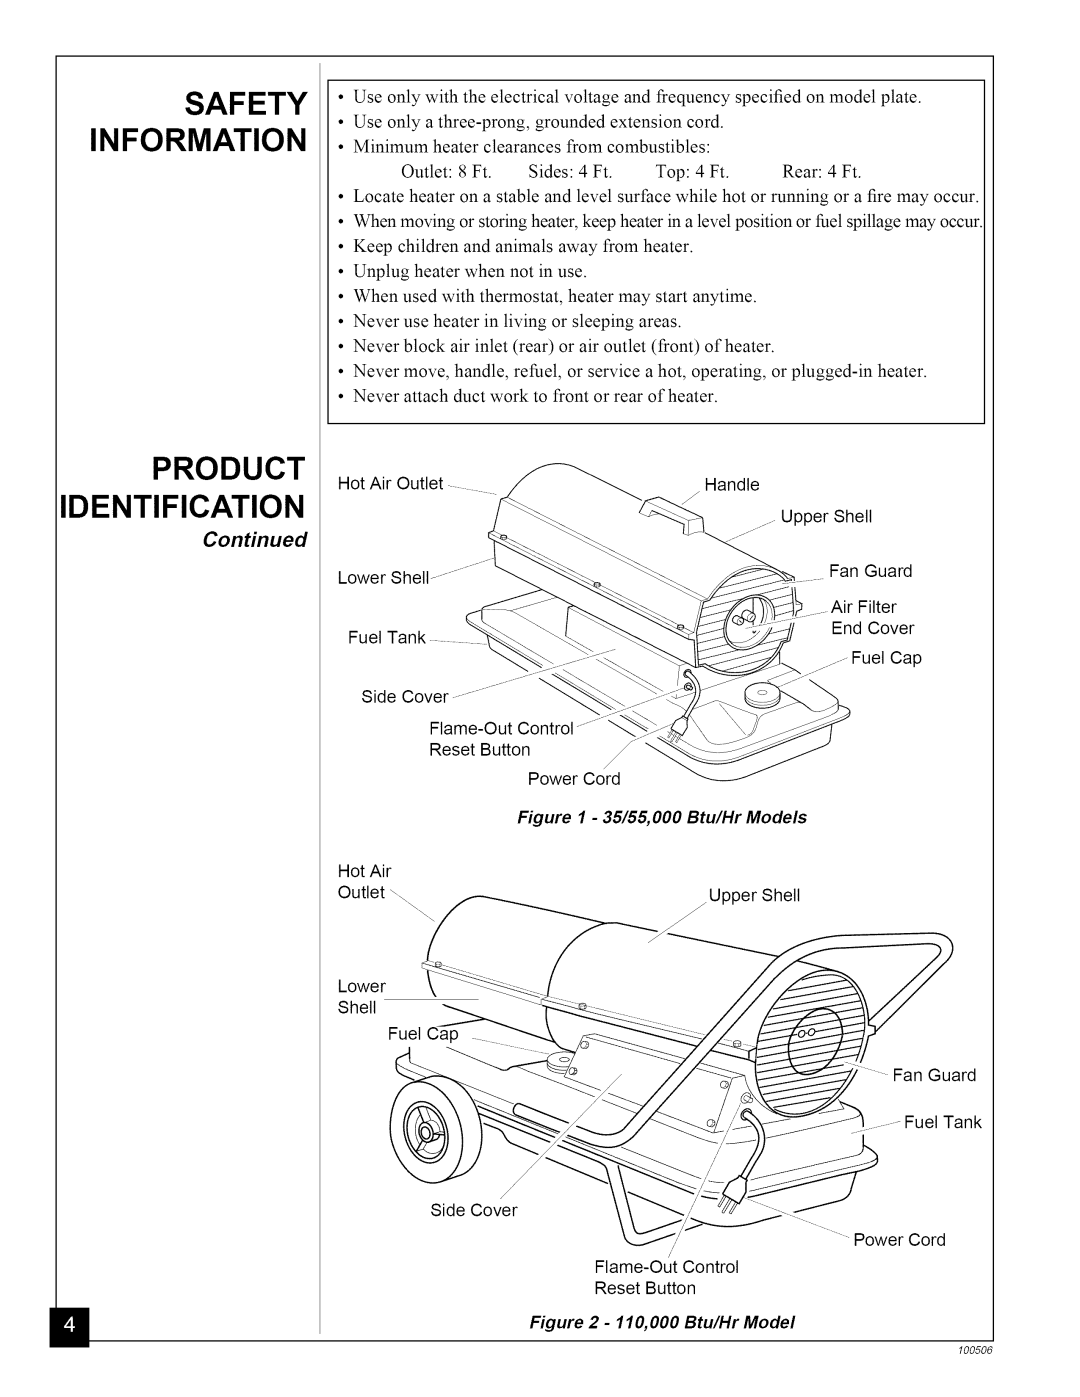 Sears 583.35682, 583.35683, 583.3565 owner manual Safety Information Product Identification, Control, Continued 